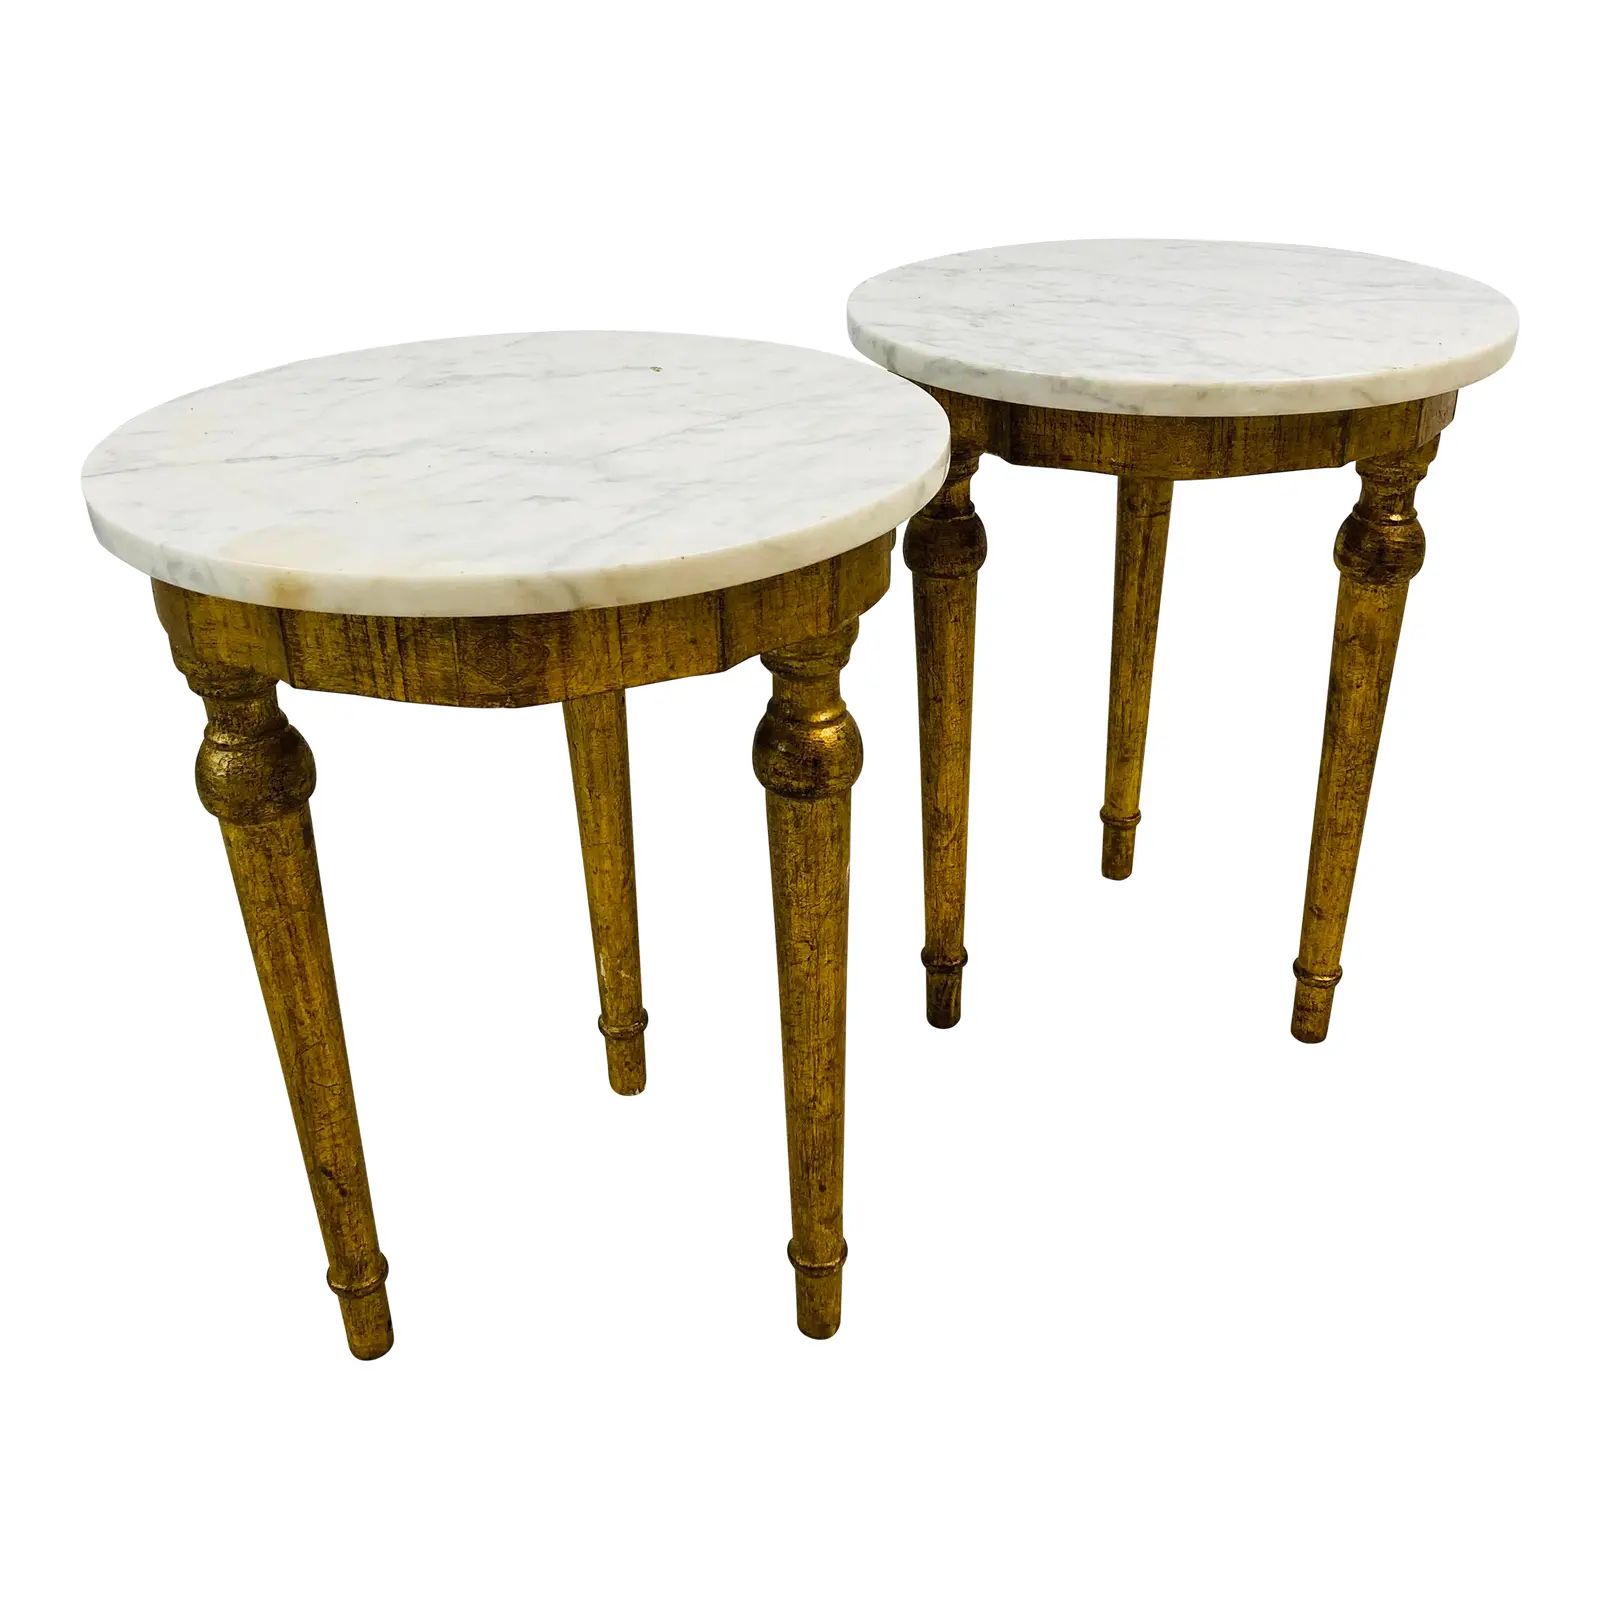 Italian Marble Top Side Tables, a Pair | Chairish